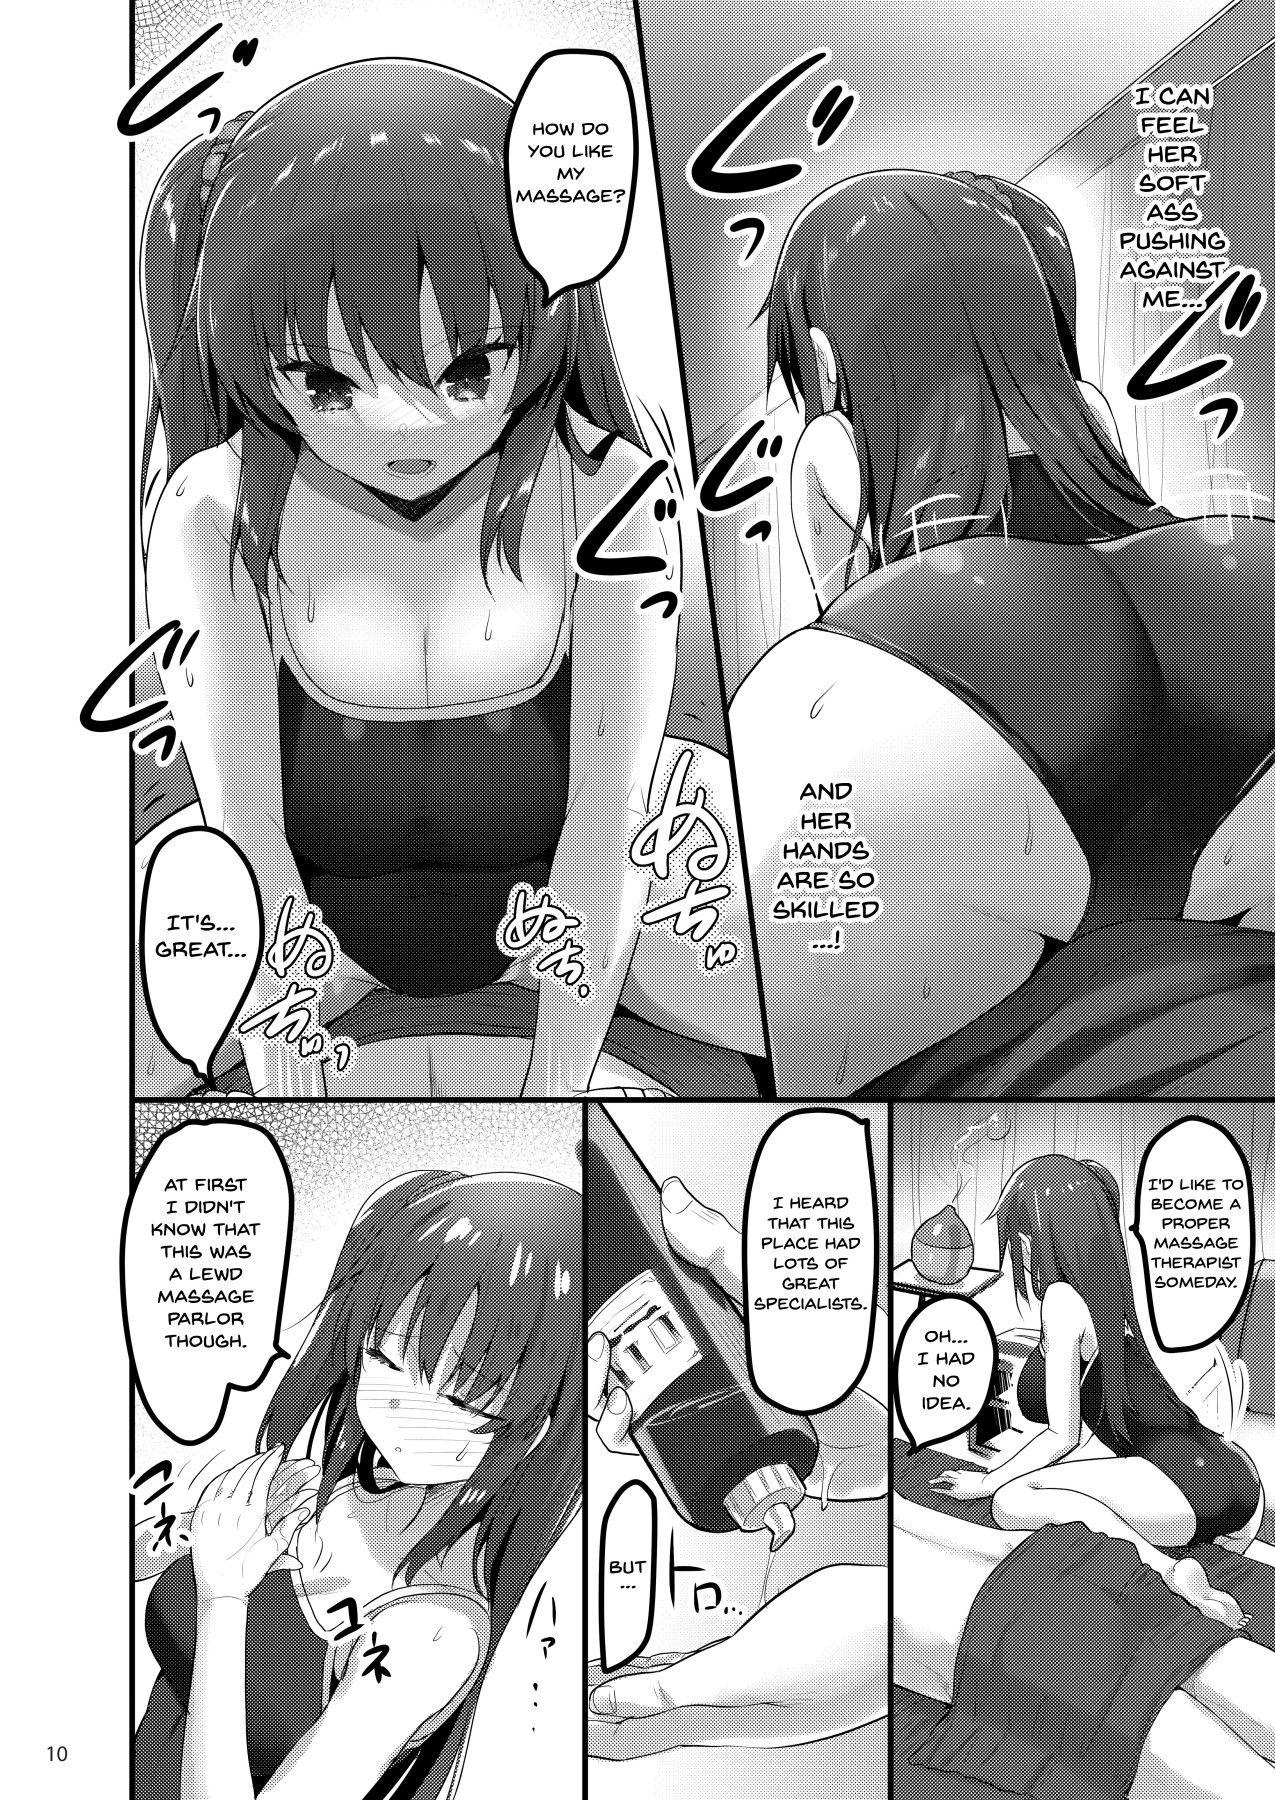 Ecchi na Massage-ya ni Kitara Classmate ga Dete Kita Hanashi | A Story Of Going Out To Get a Massage And The One Who Shows Up Is My Classmate 8